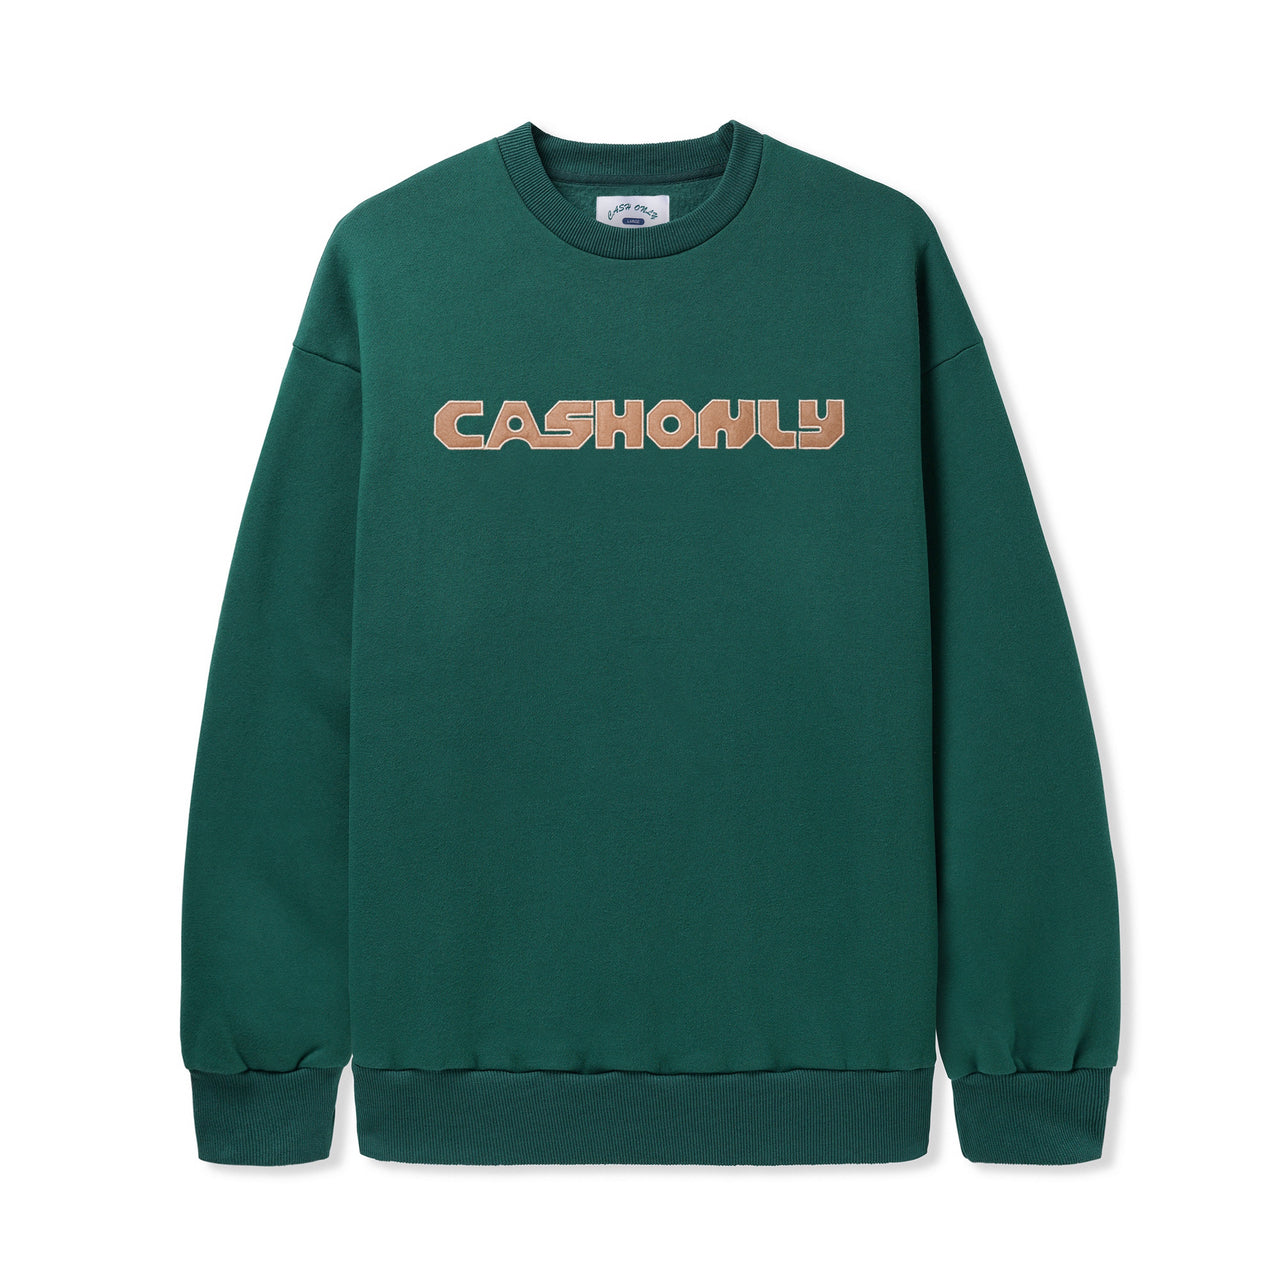 CASH ONLY - HOLD IT DOWN CREWNECK SWEATSHIRT - FOREST